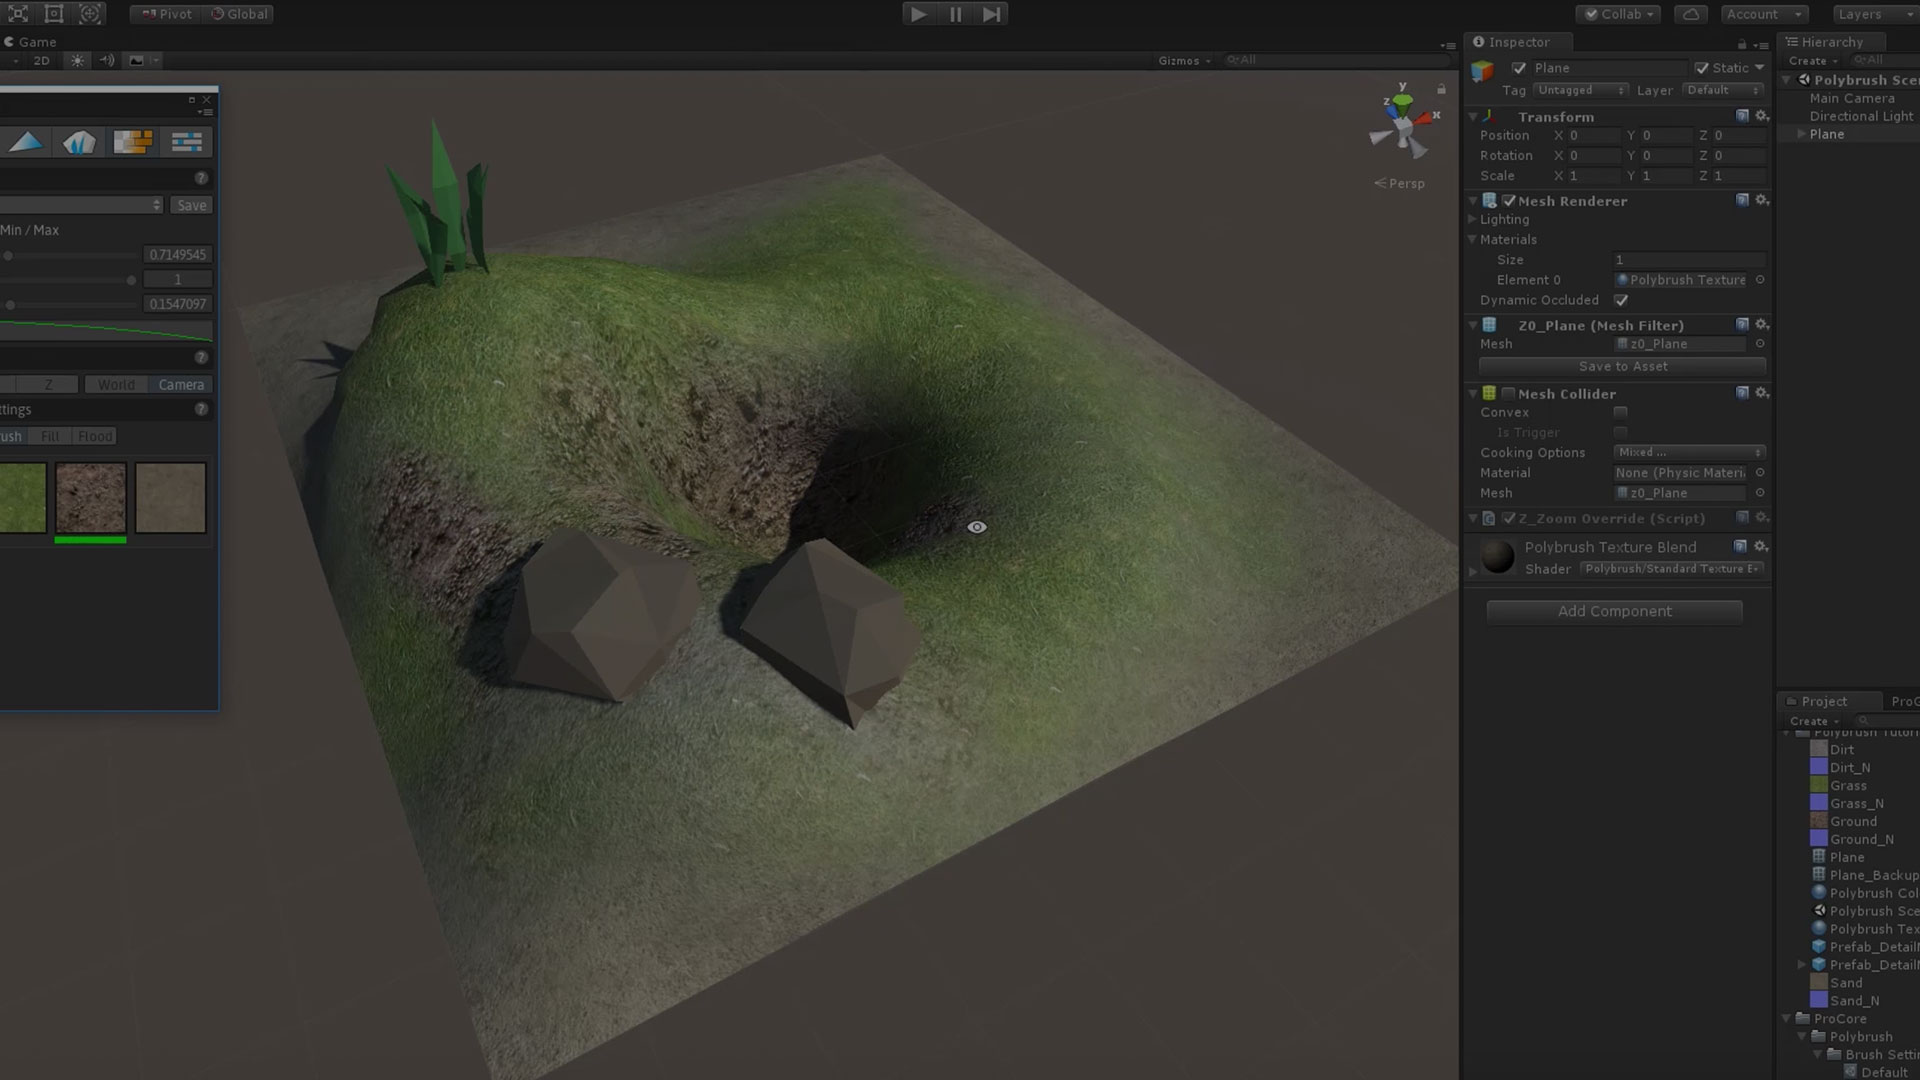 Unity 3D 2019 Ver.1.15 Included